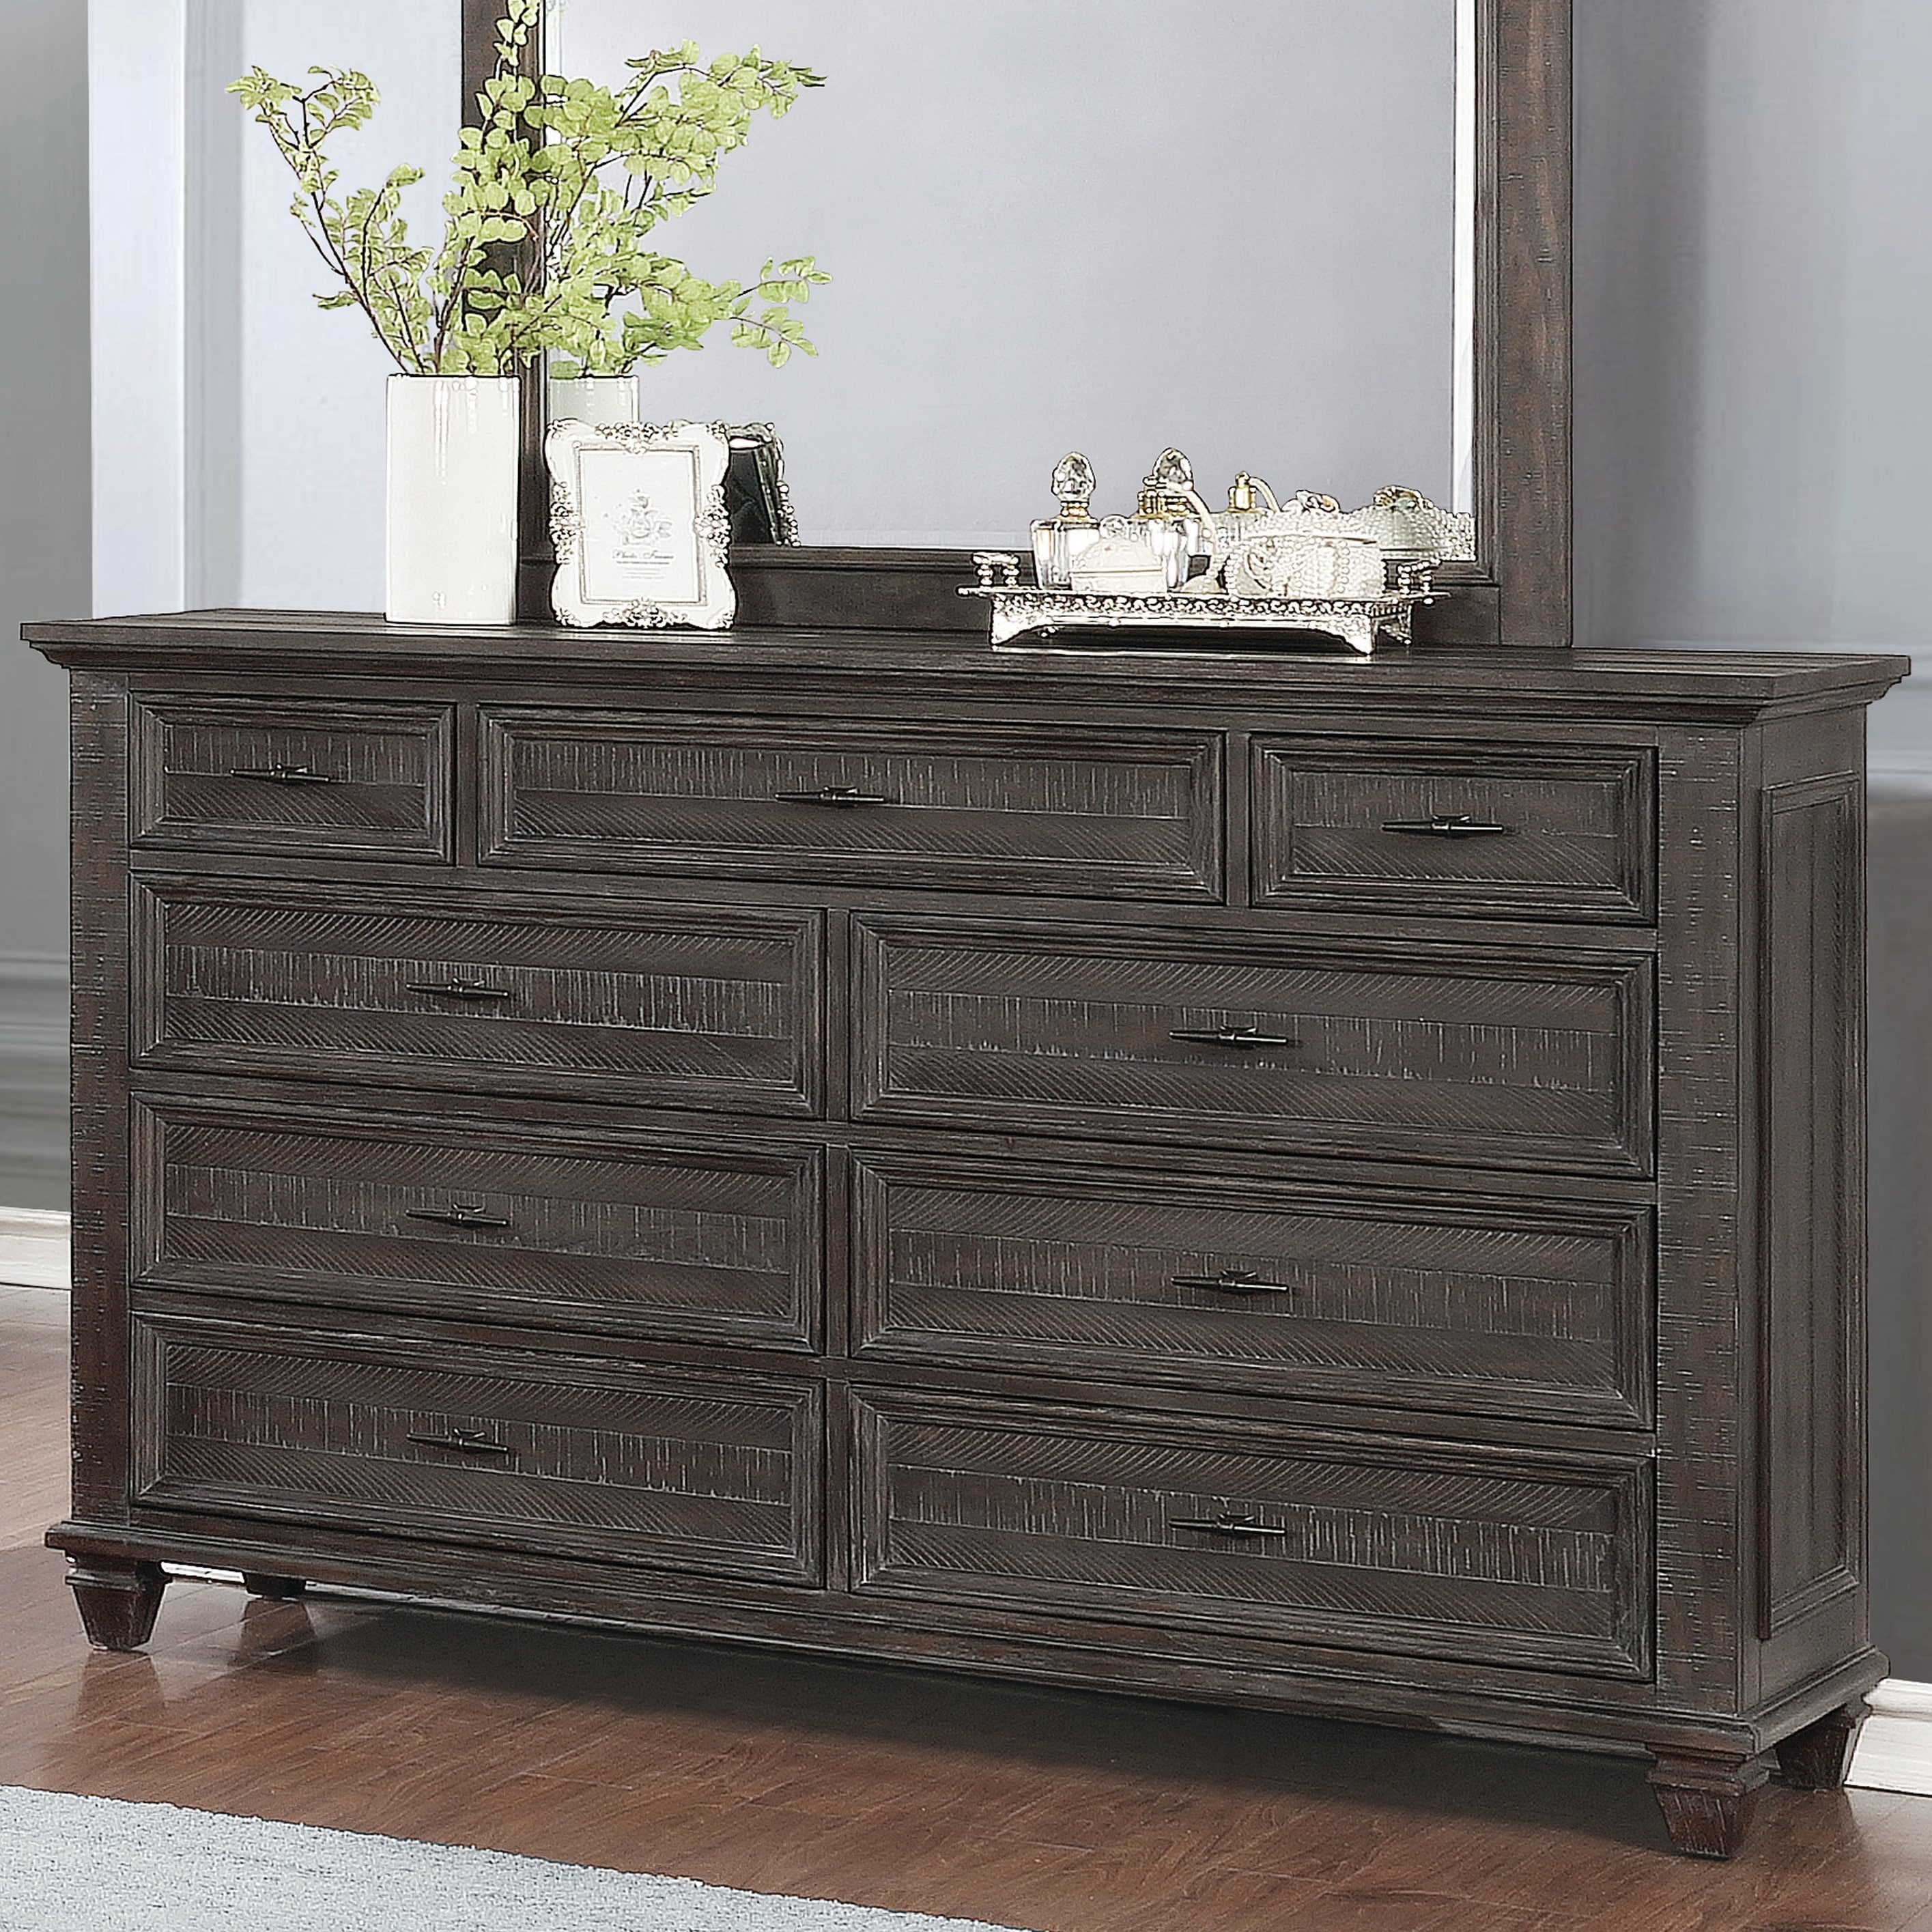 Shop The Gray Barn Mansfield Park Weathered Carbon 9 Drawer